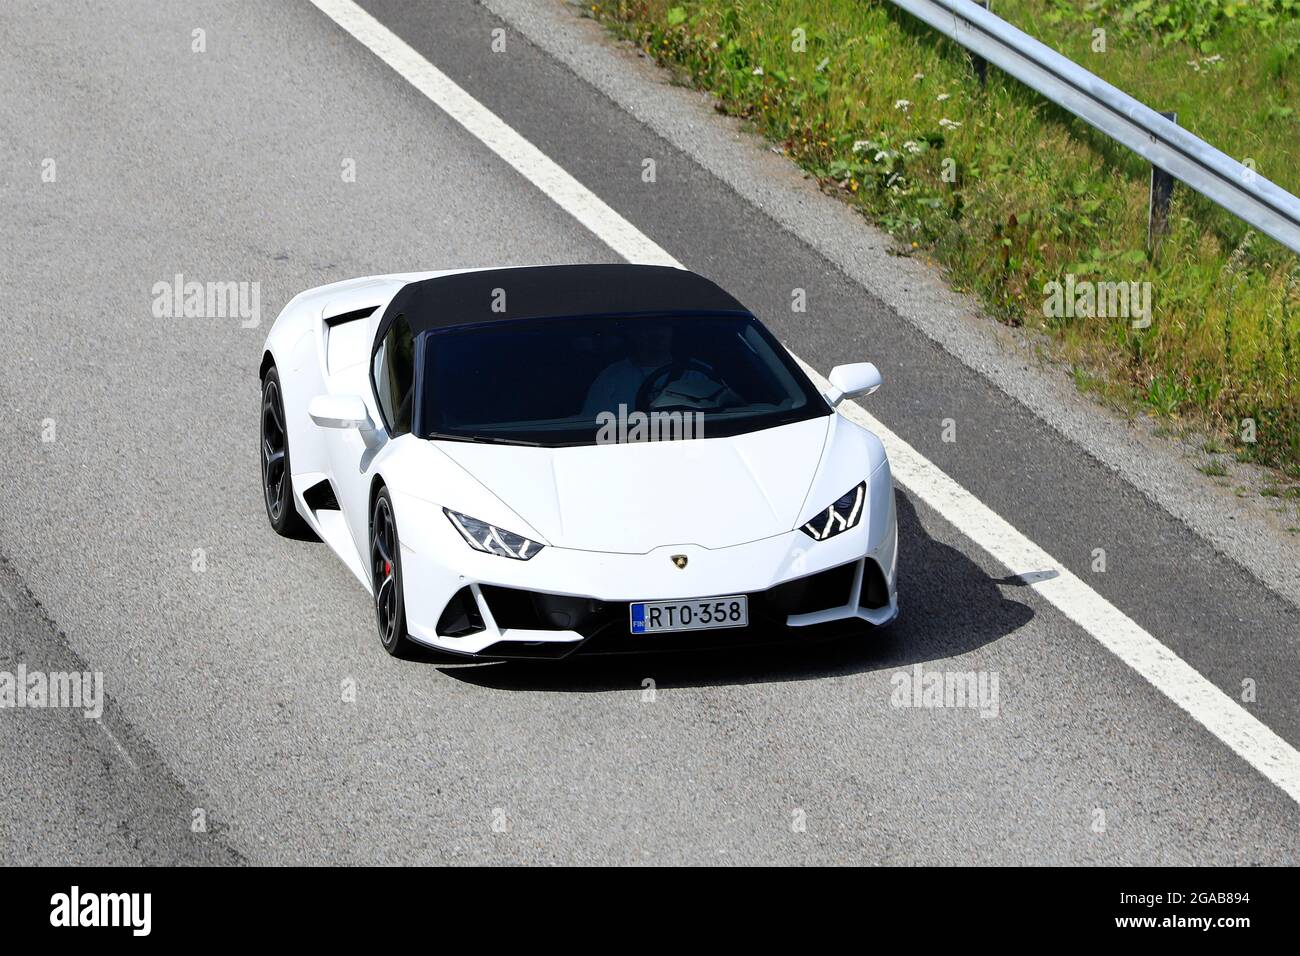 White Lamborghini Huracán LP 580-2 Spyder supercar at speed on motorway  E18, elevated view. Salo, Finland. July 23, 2021 Stock Photo - Alamy